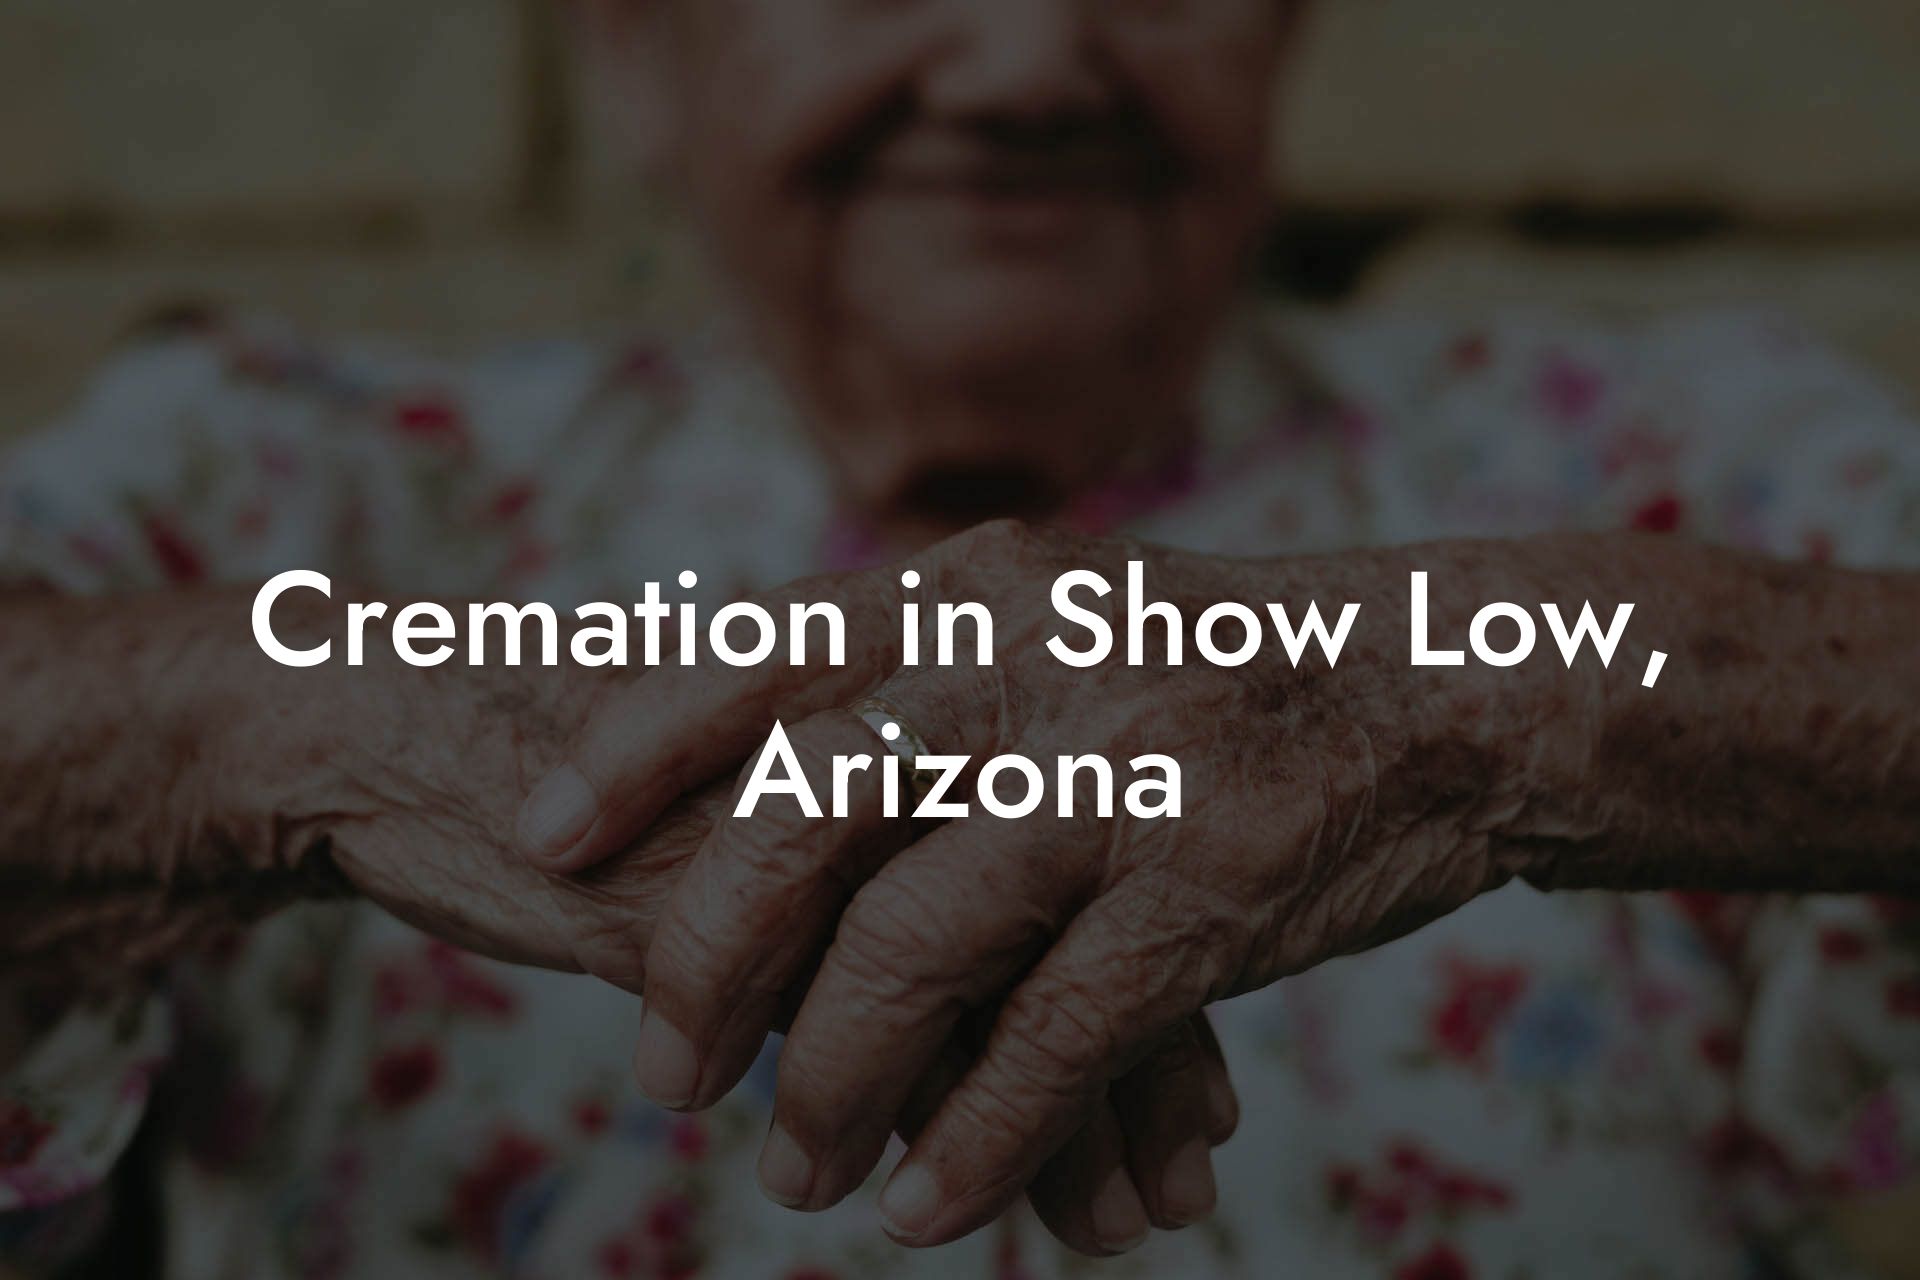 Cremation in Show Low, Arizona